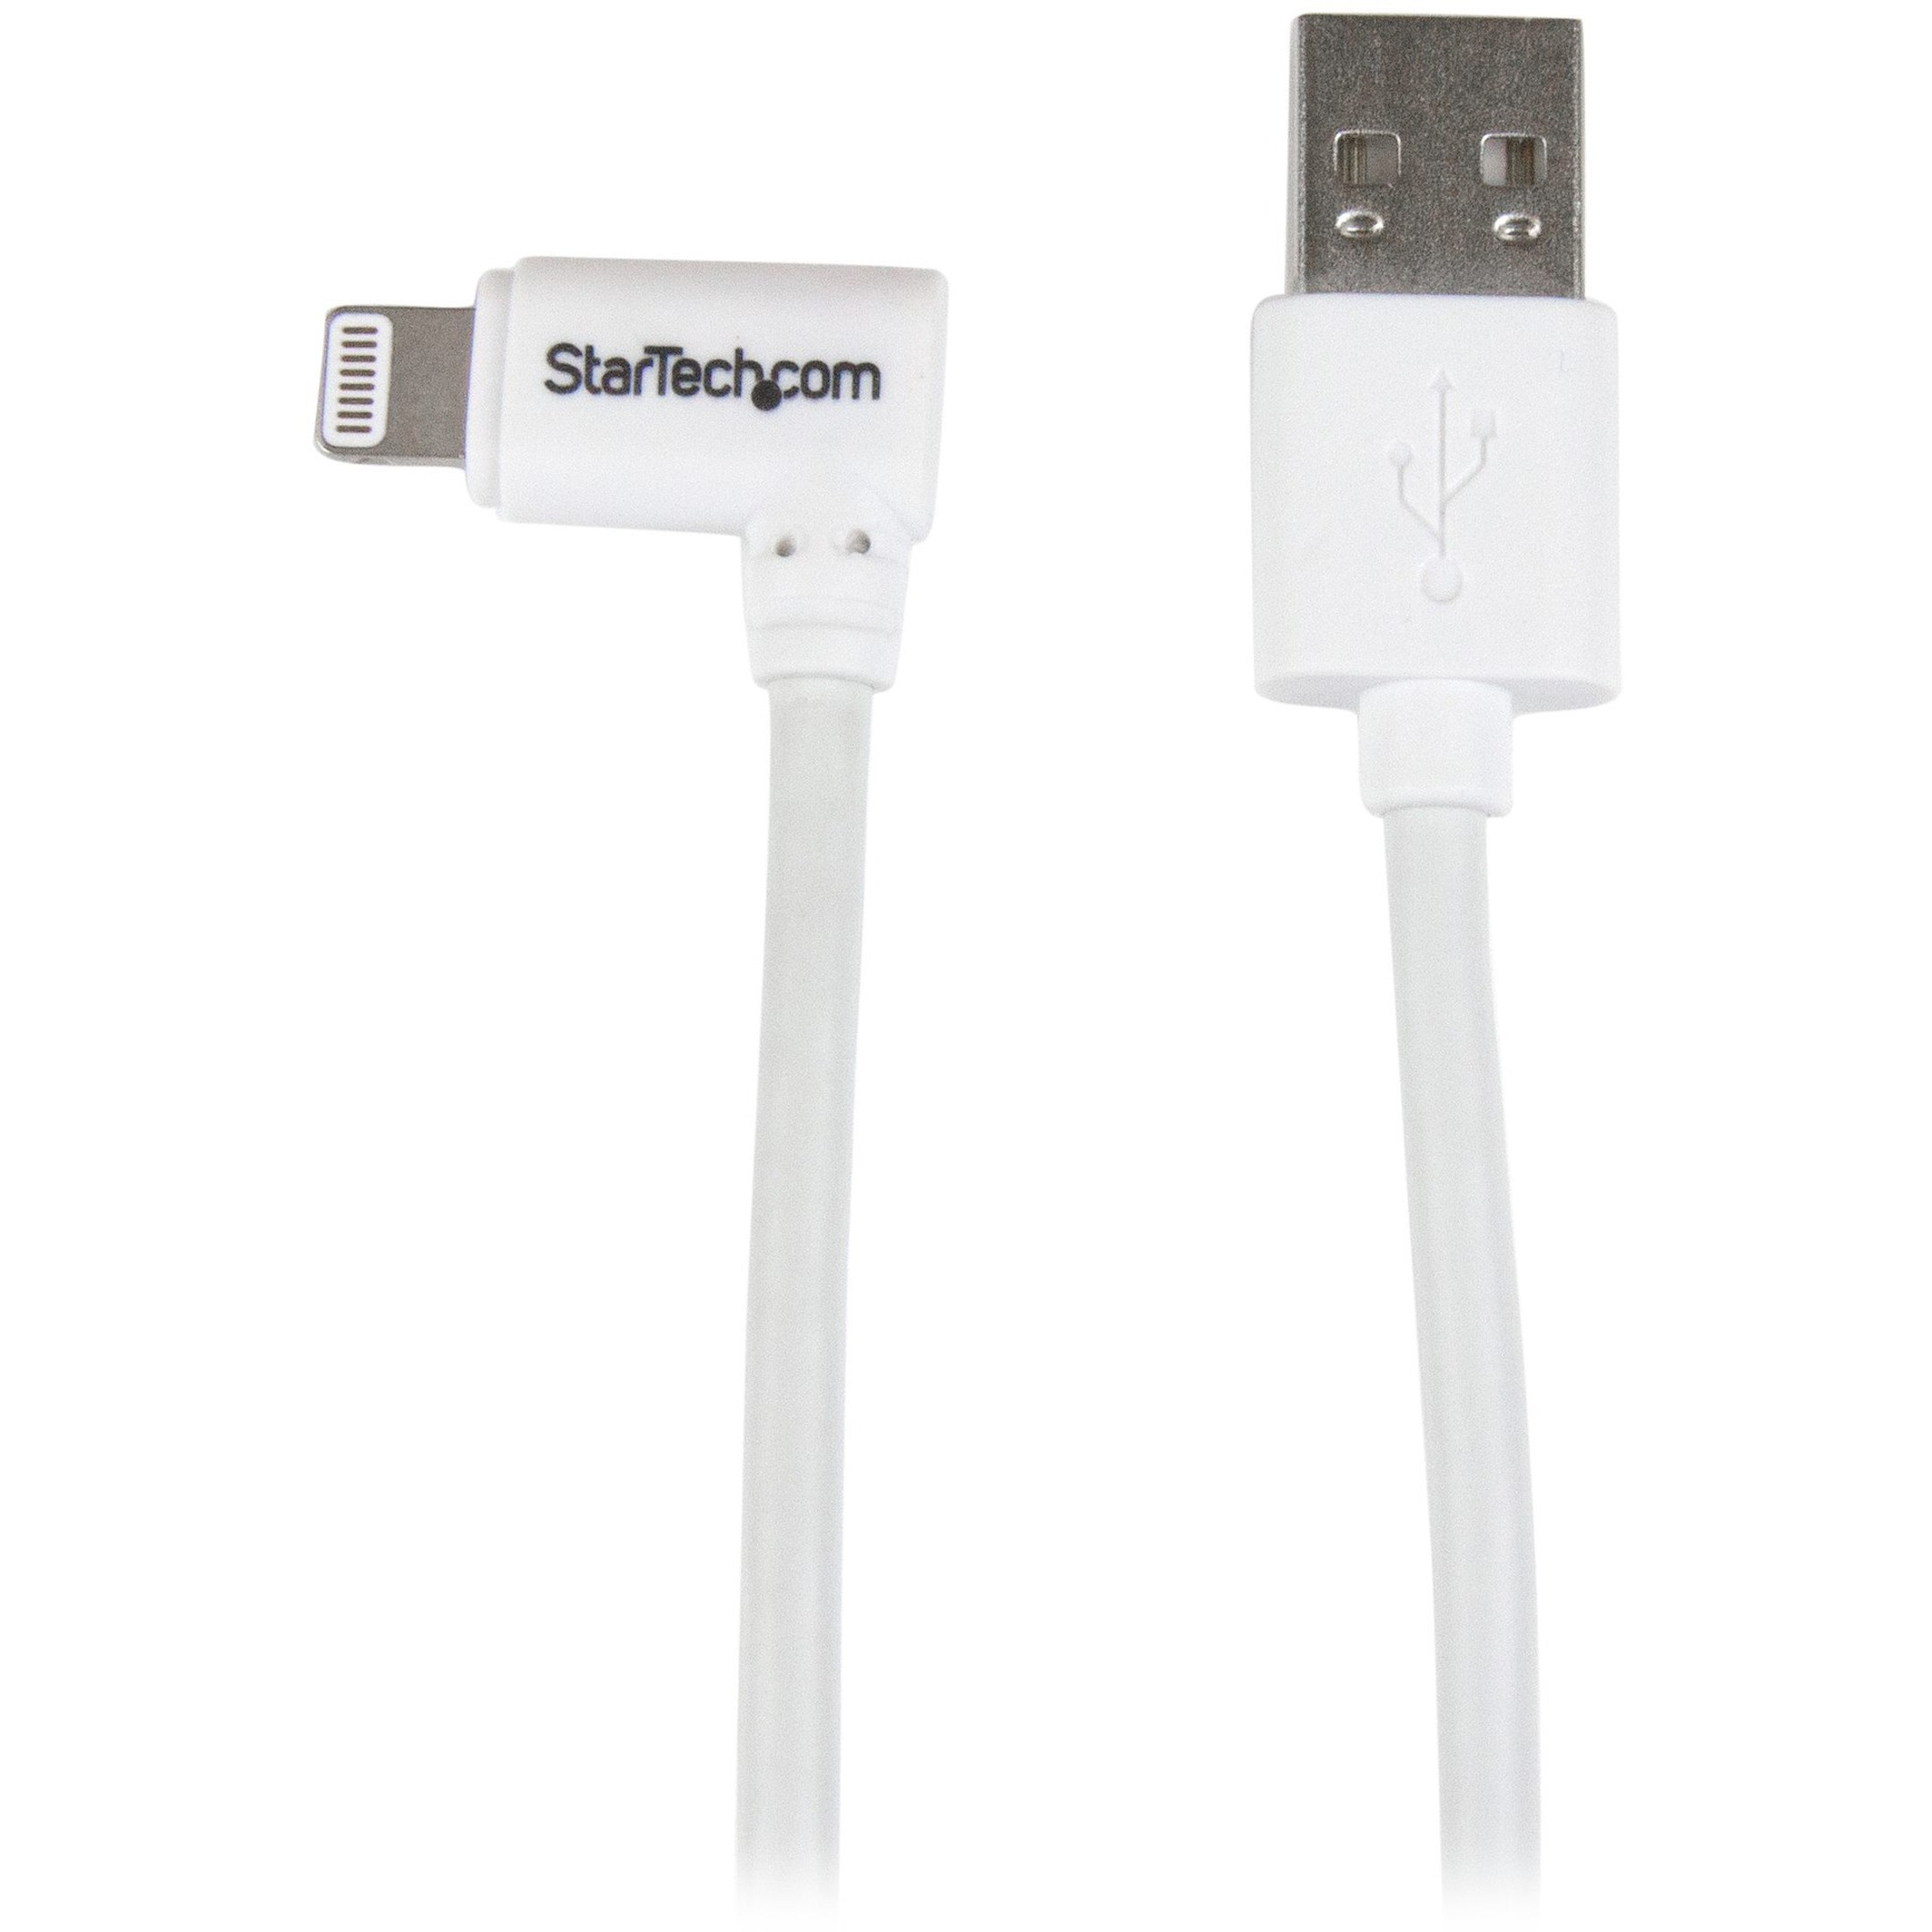 Startech .com 1m 3 ft Angled Lightning to USB CableWhiteAngled Lightning Cable for iPhone / iPod / iPadCharge or sync an iPhone, iPod… USBLT1MWR